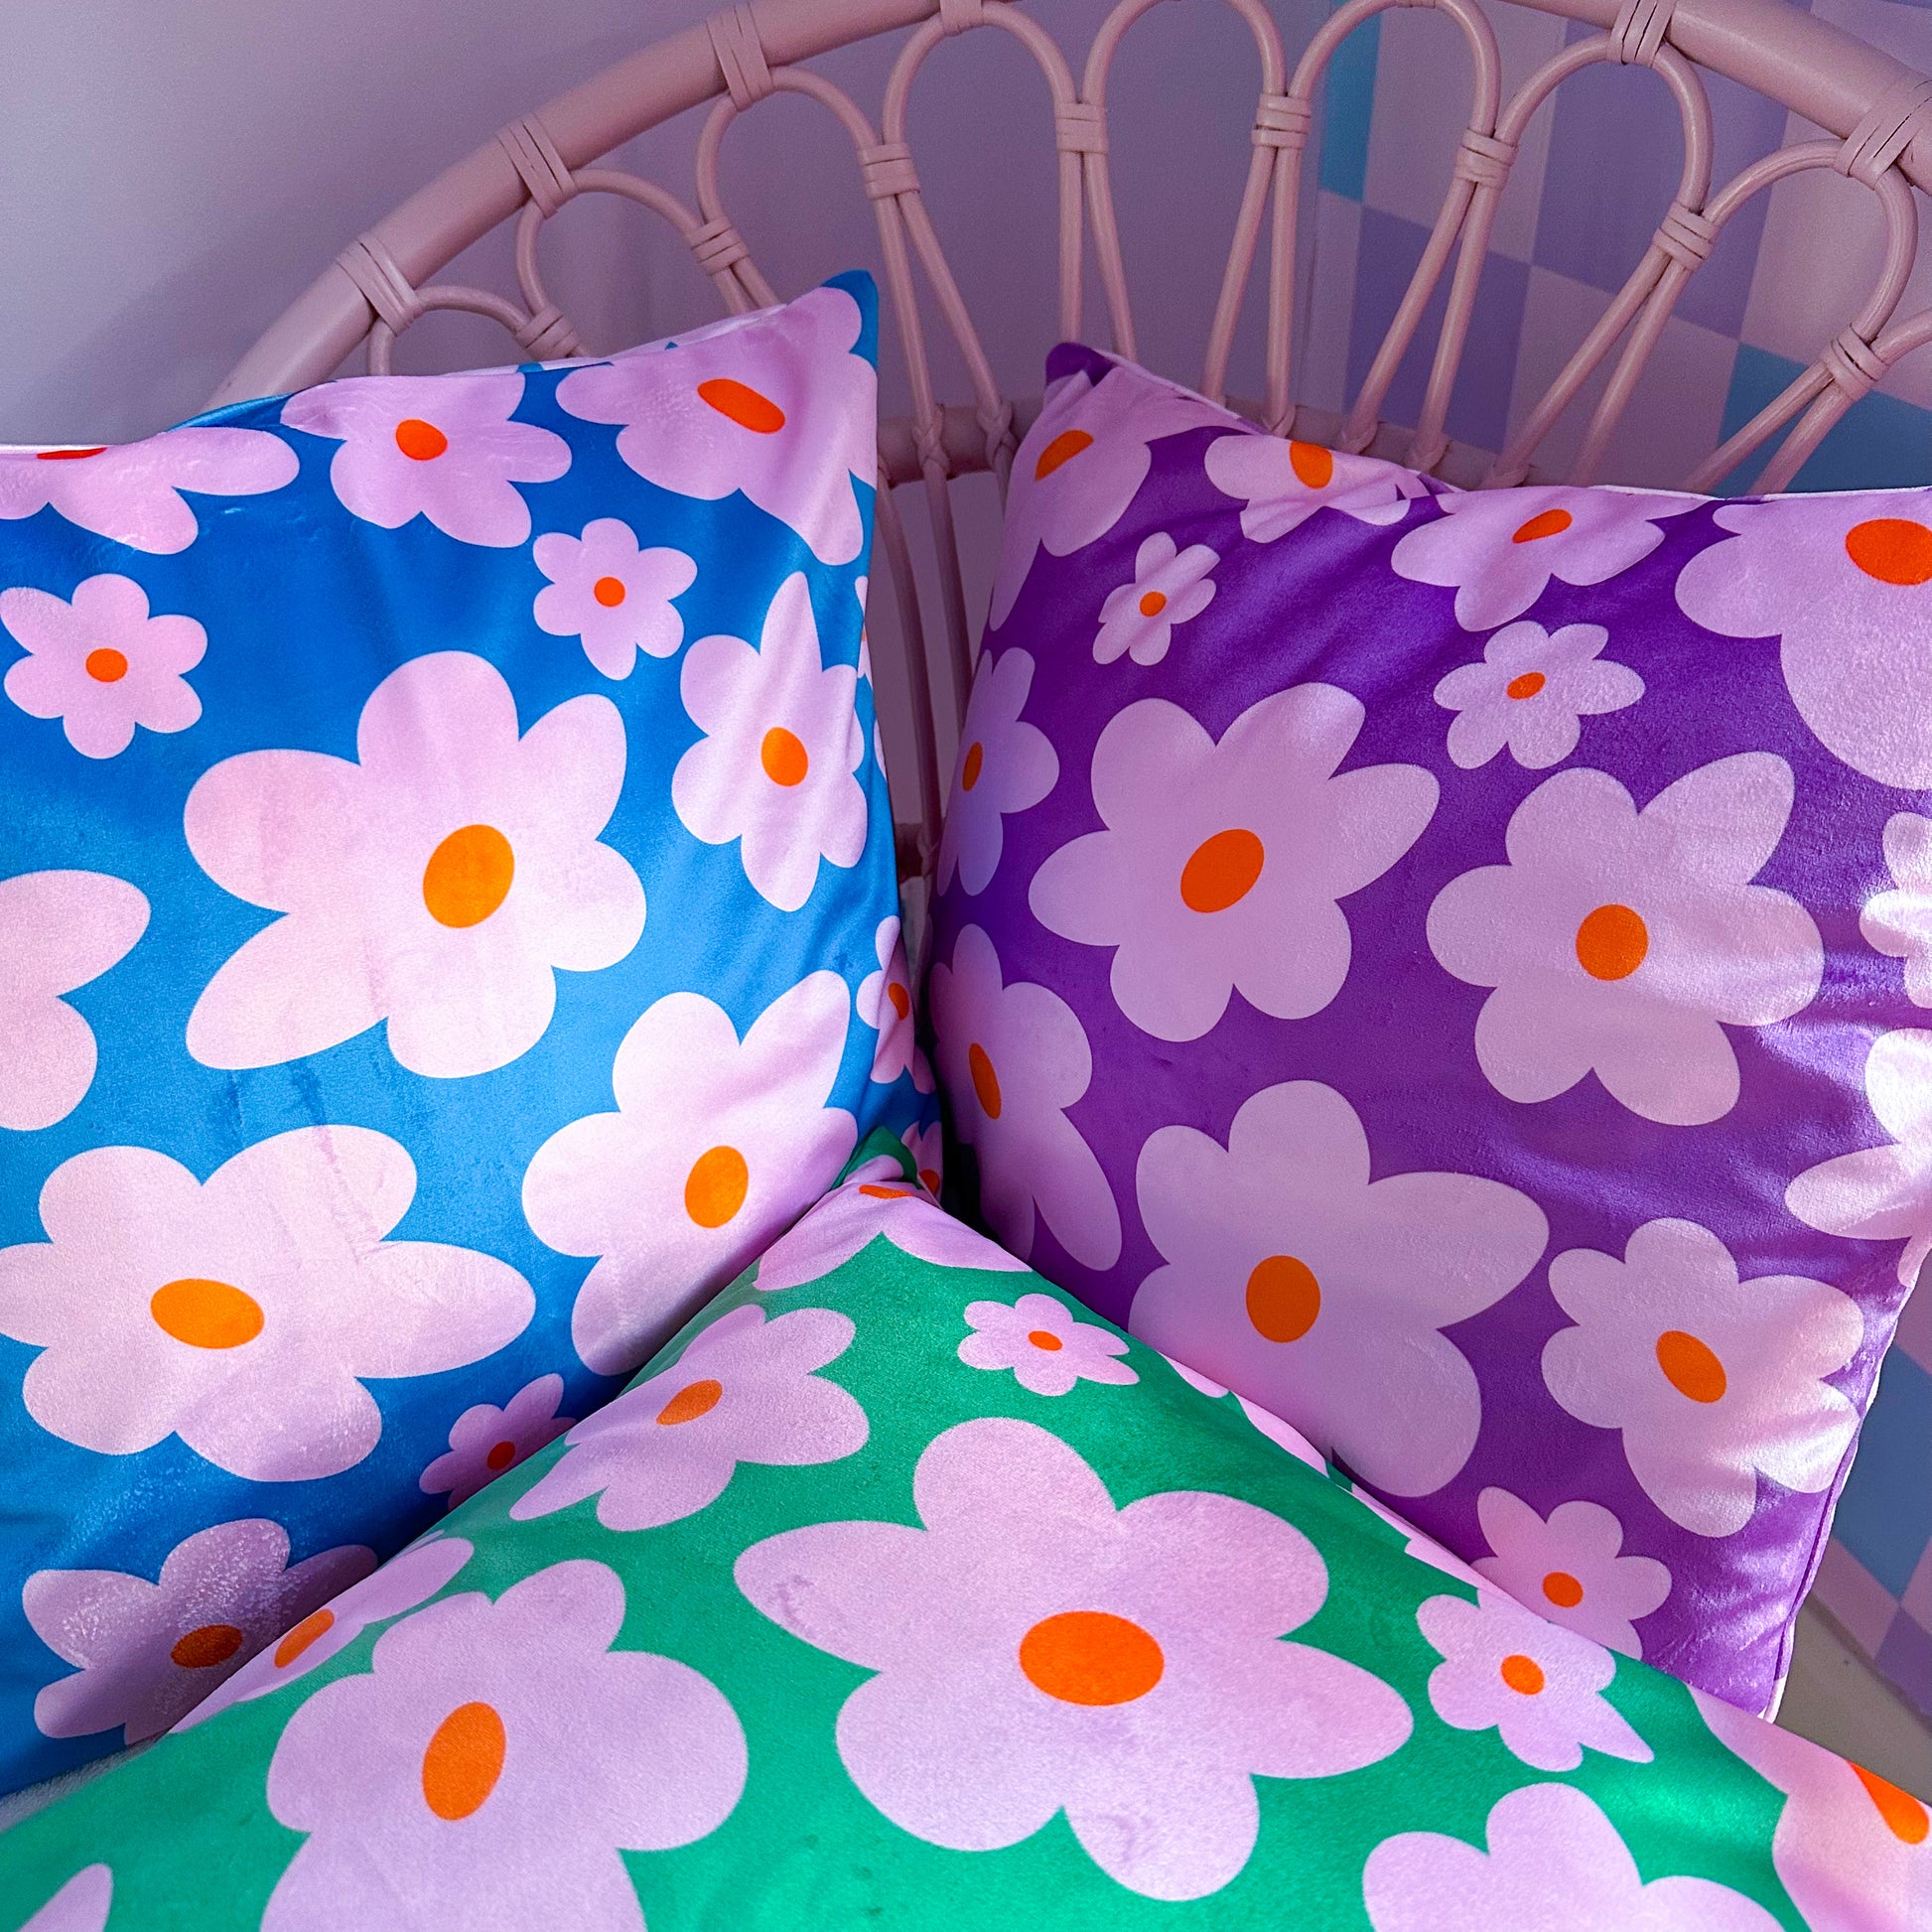 daisy cushions made from velvet material in purple, pink, blue and green colours